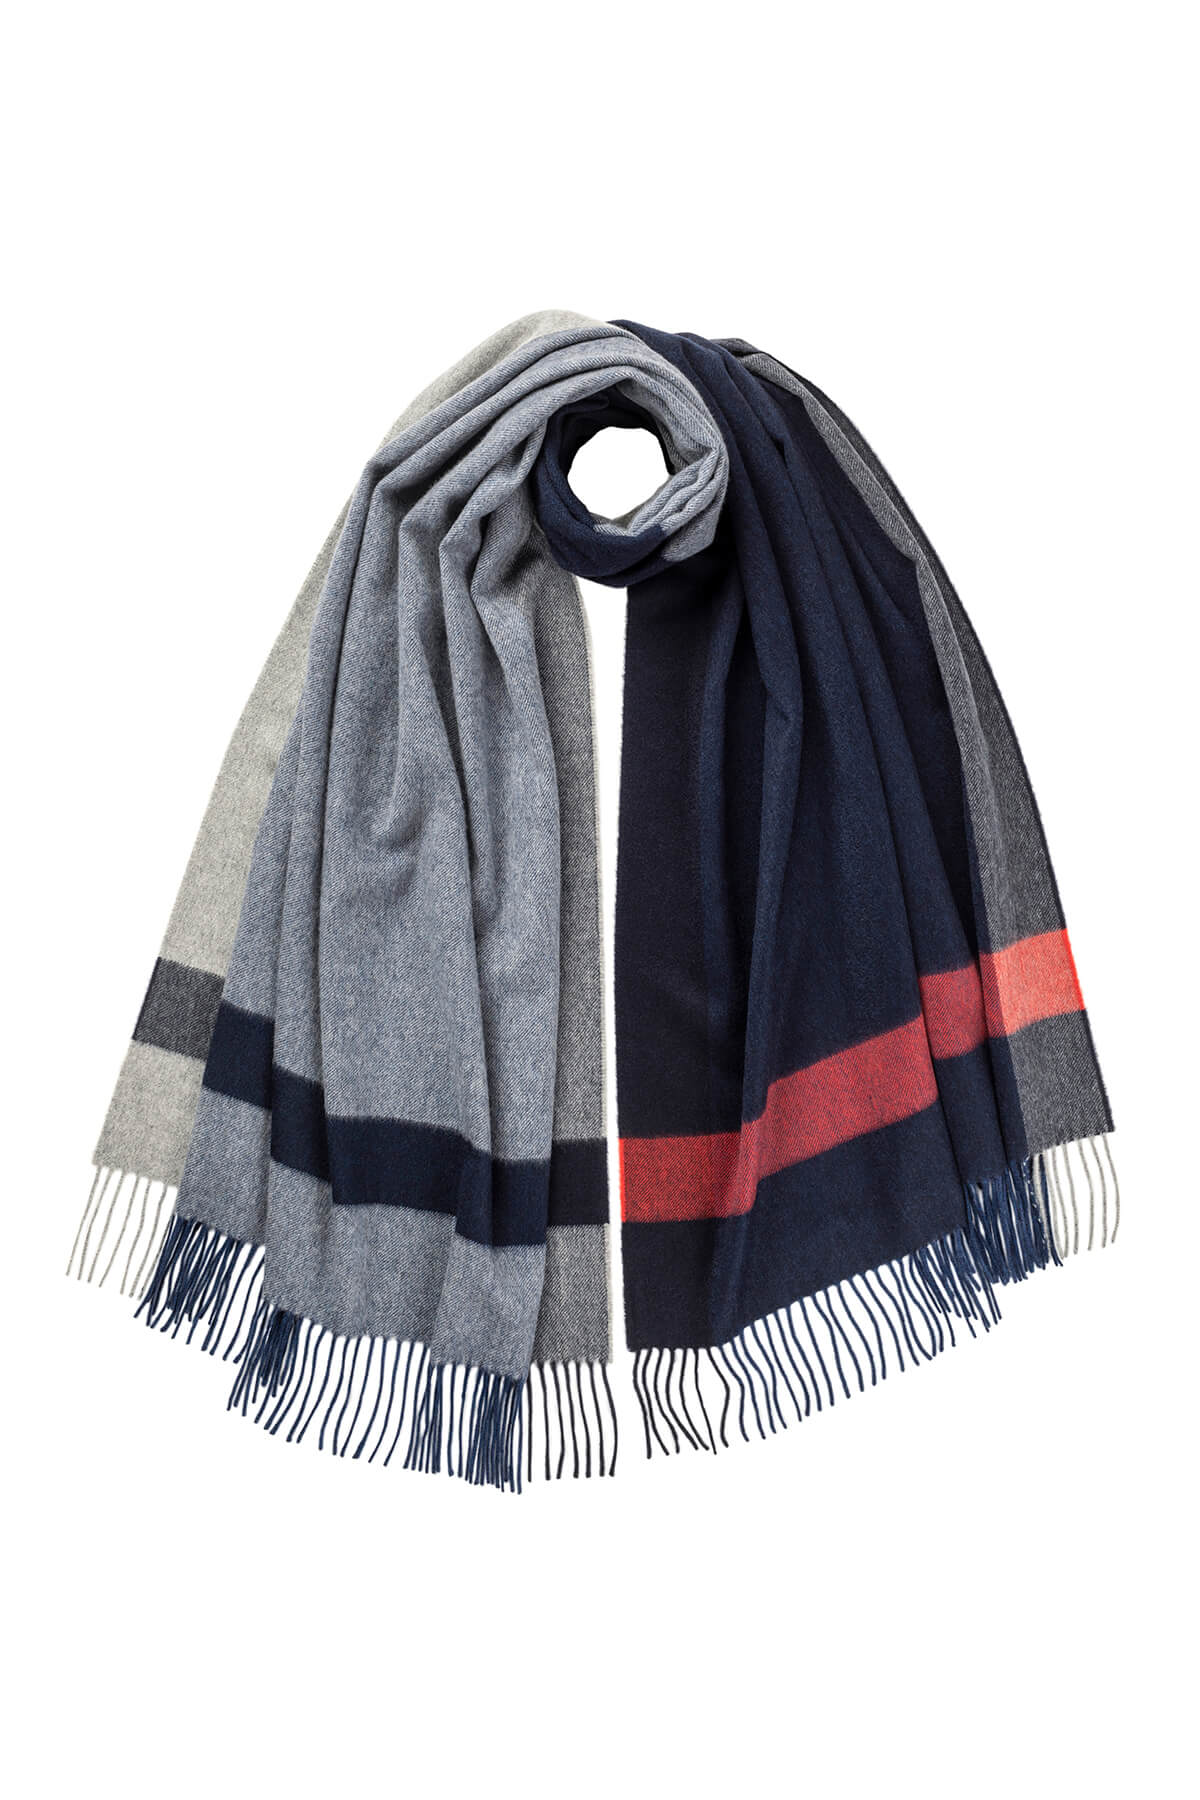 Johnstons of Elgin Colour Block Bordered Pure Cashmere Stole in Navy Check on a white background WA000056RU7305ONE